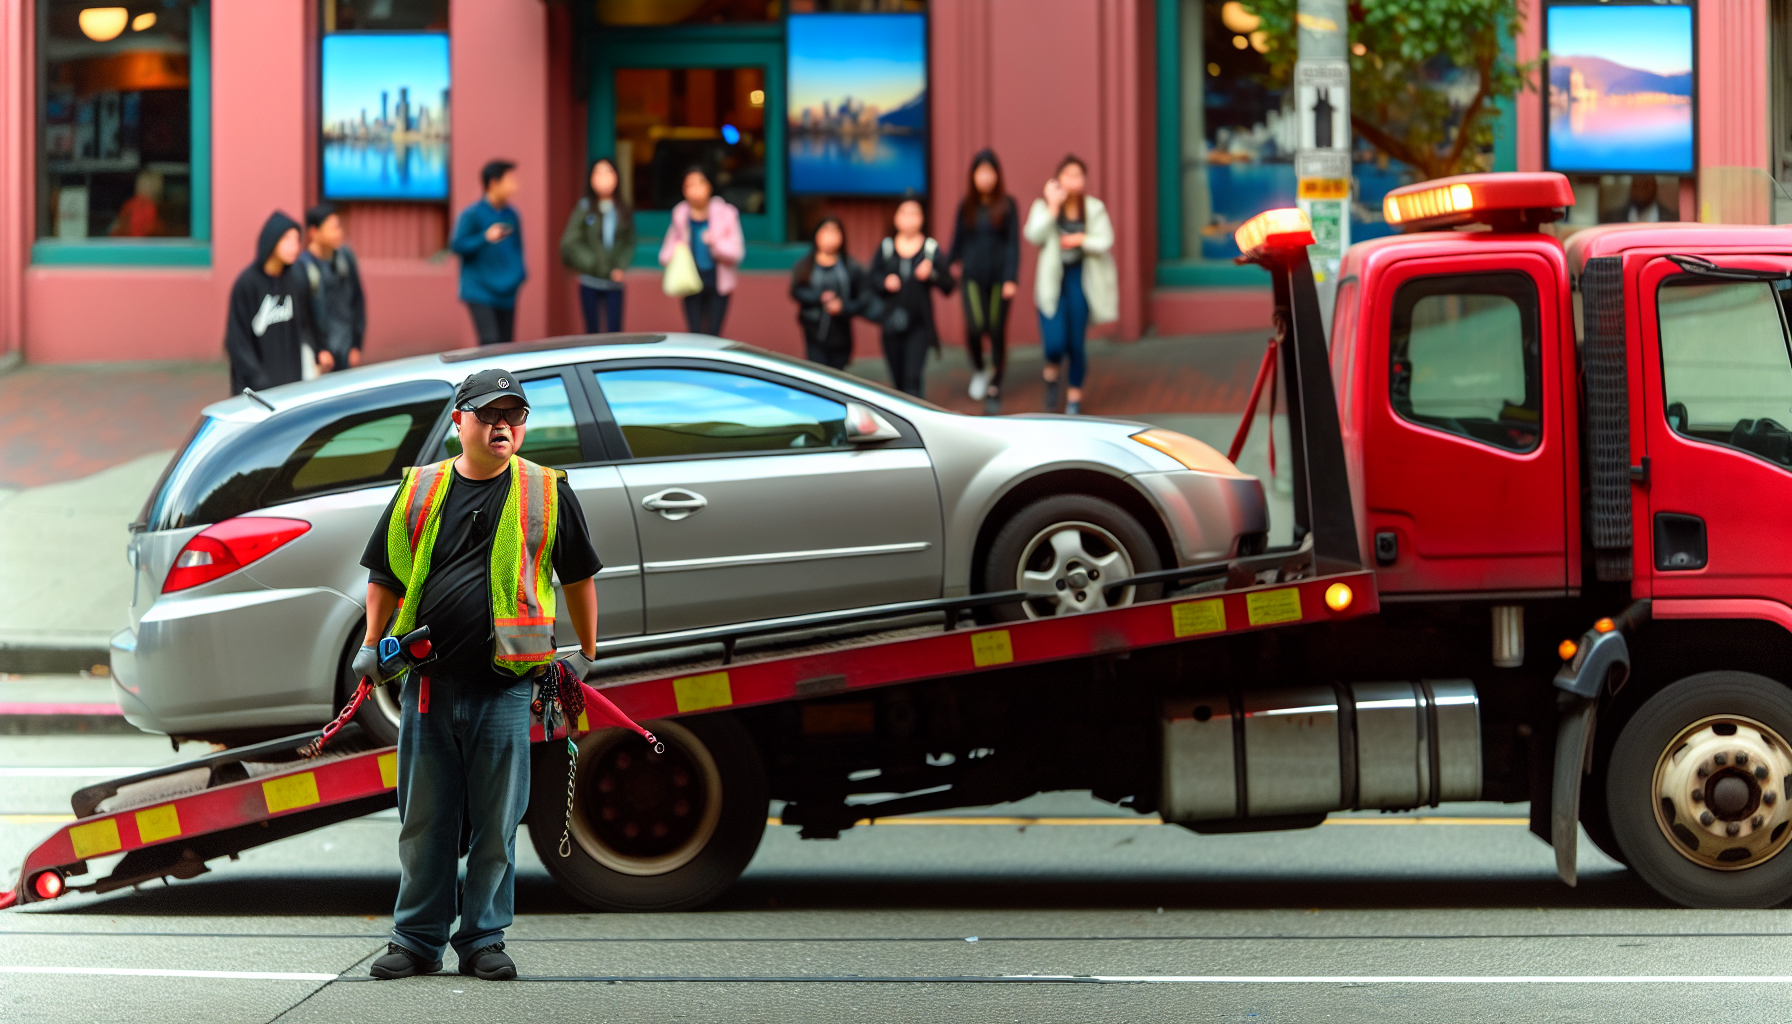 A car being towed by a tow truck